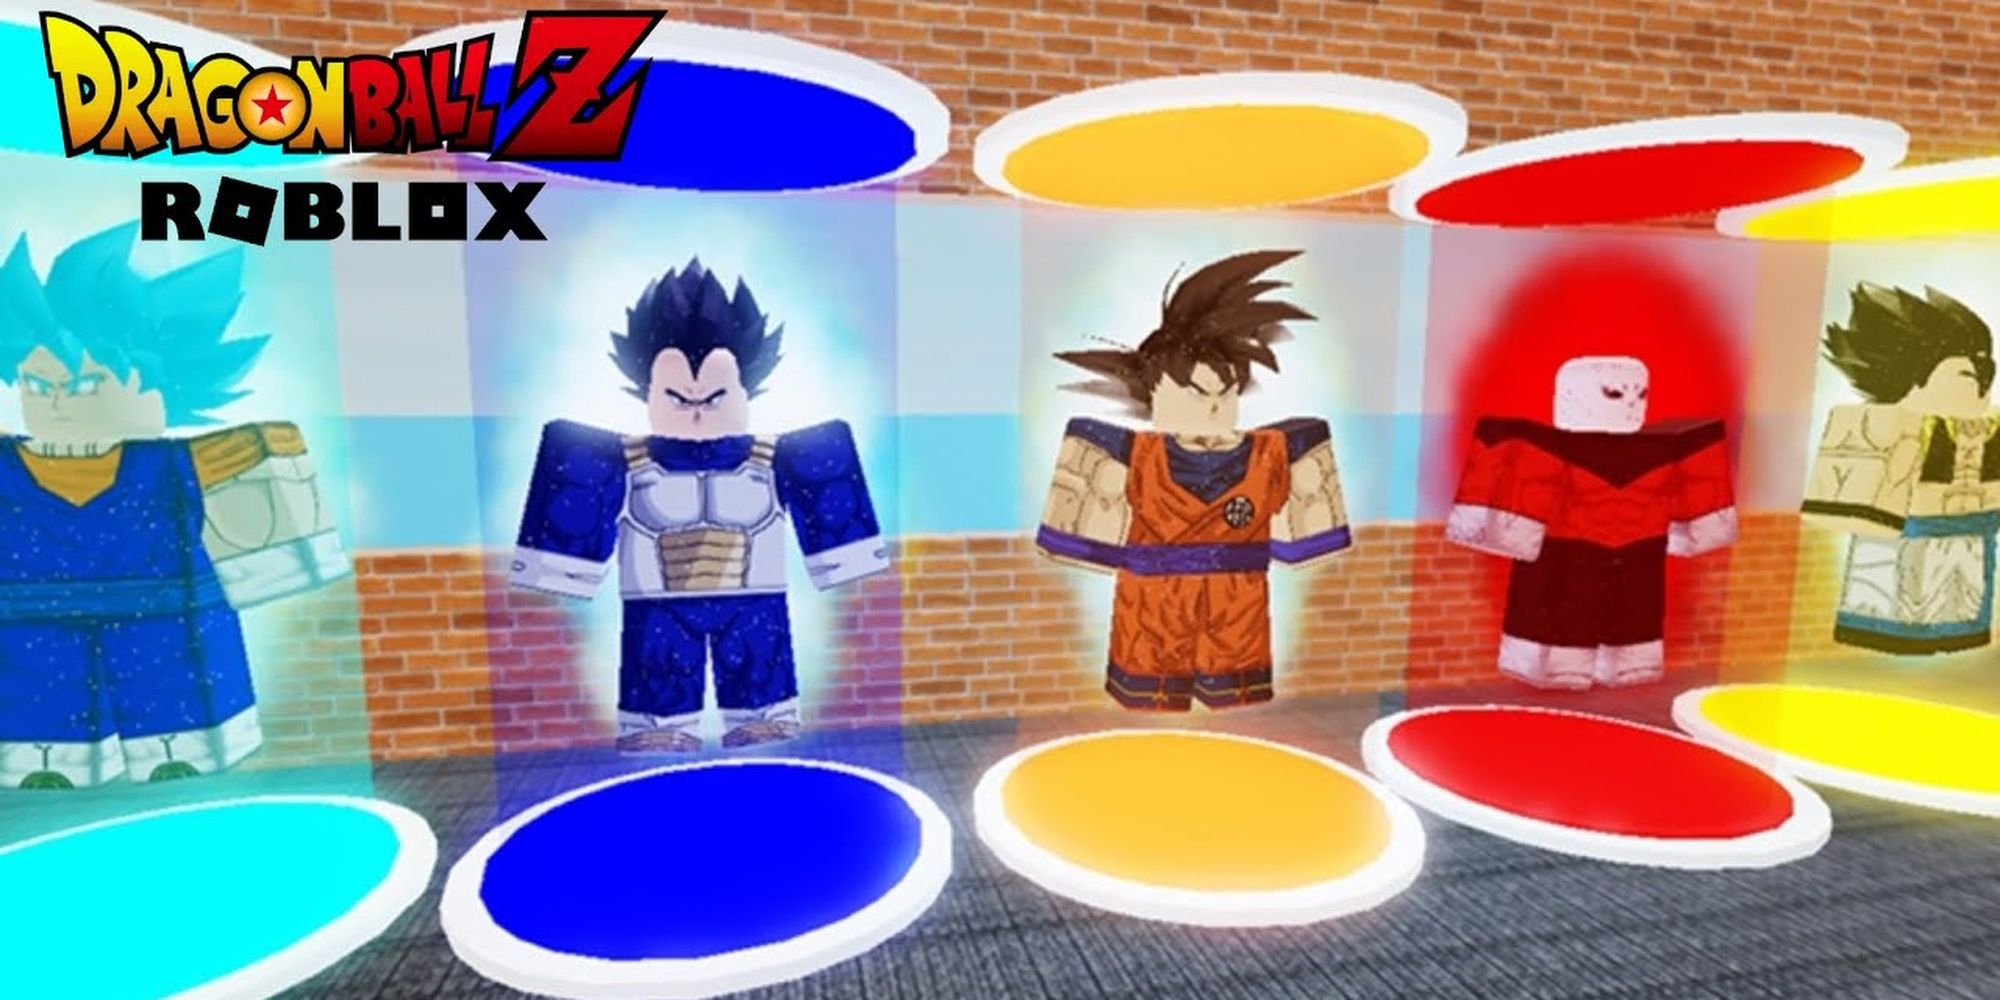 Thumbnail for the Dragon Ball Tycoon game in Roblox.